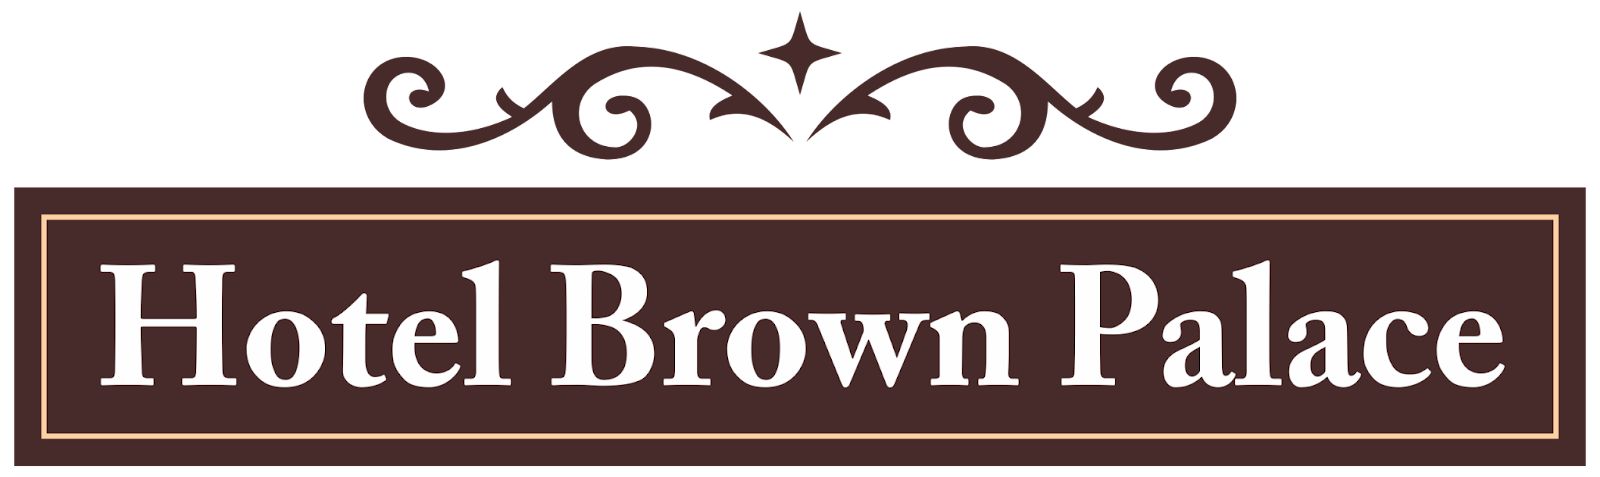 Hotel Brown Palace